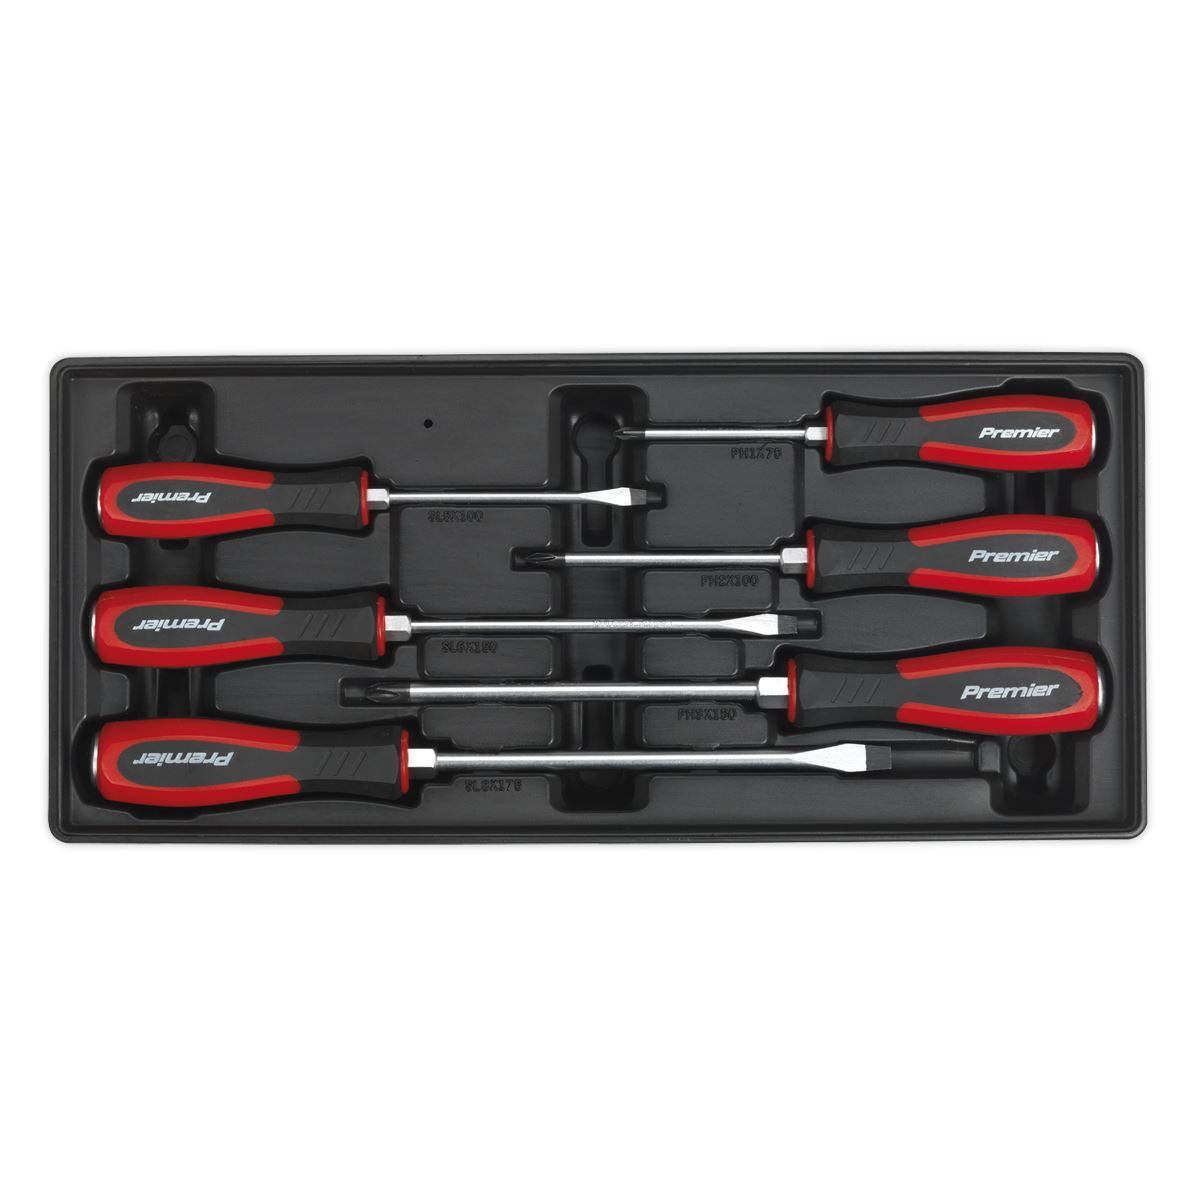 Sealey Premier Tool Tray with Hammer-Thru Screwdriver Set 6pc